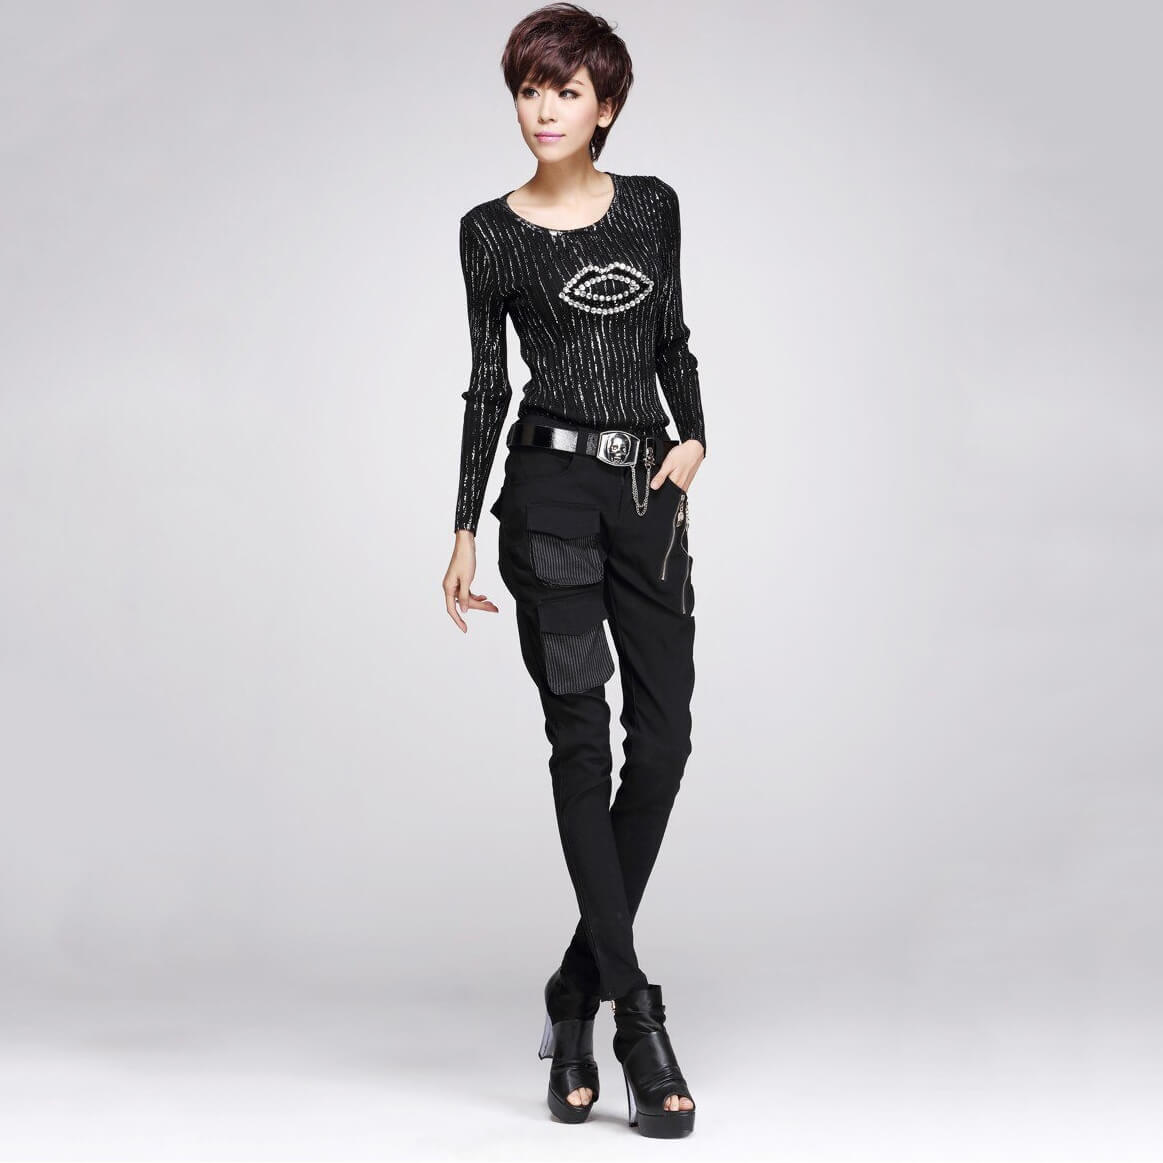 Gothic Style Women's Black Pencil Pants / High-quality Elastic Waist Stretchable Material Pants - HARD'N'HEAVY